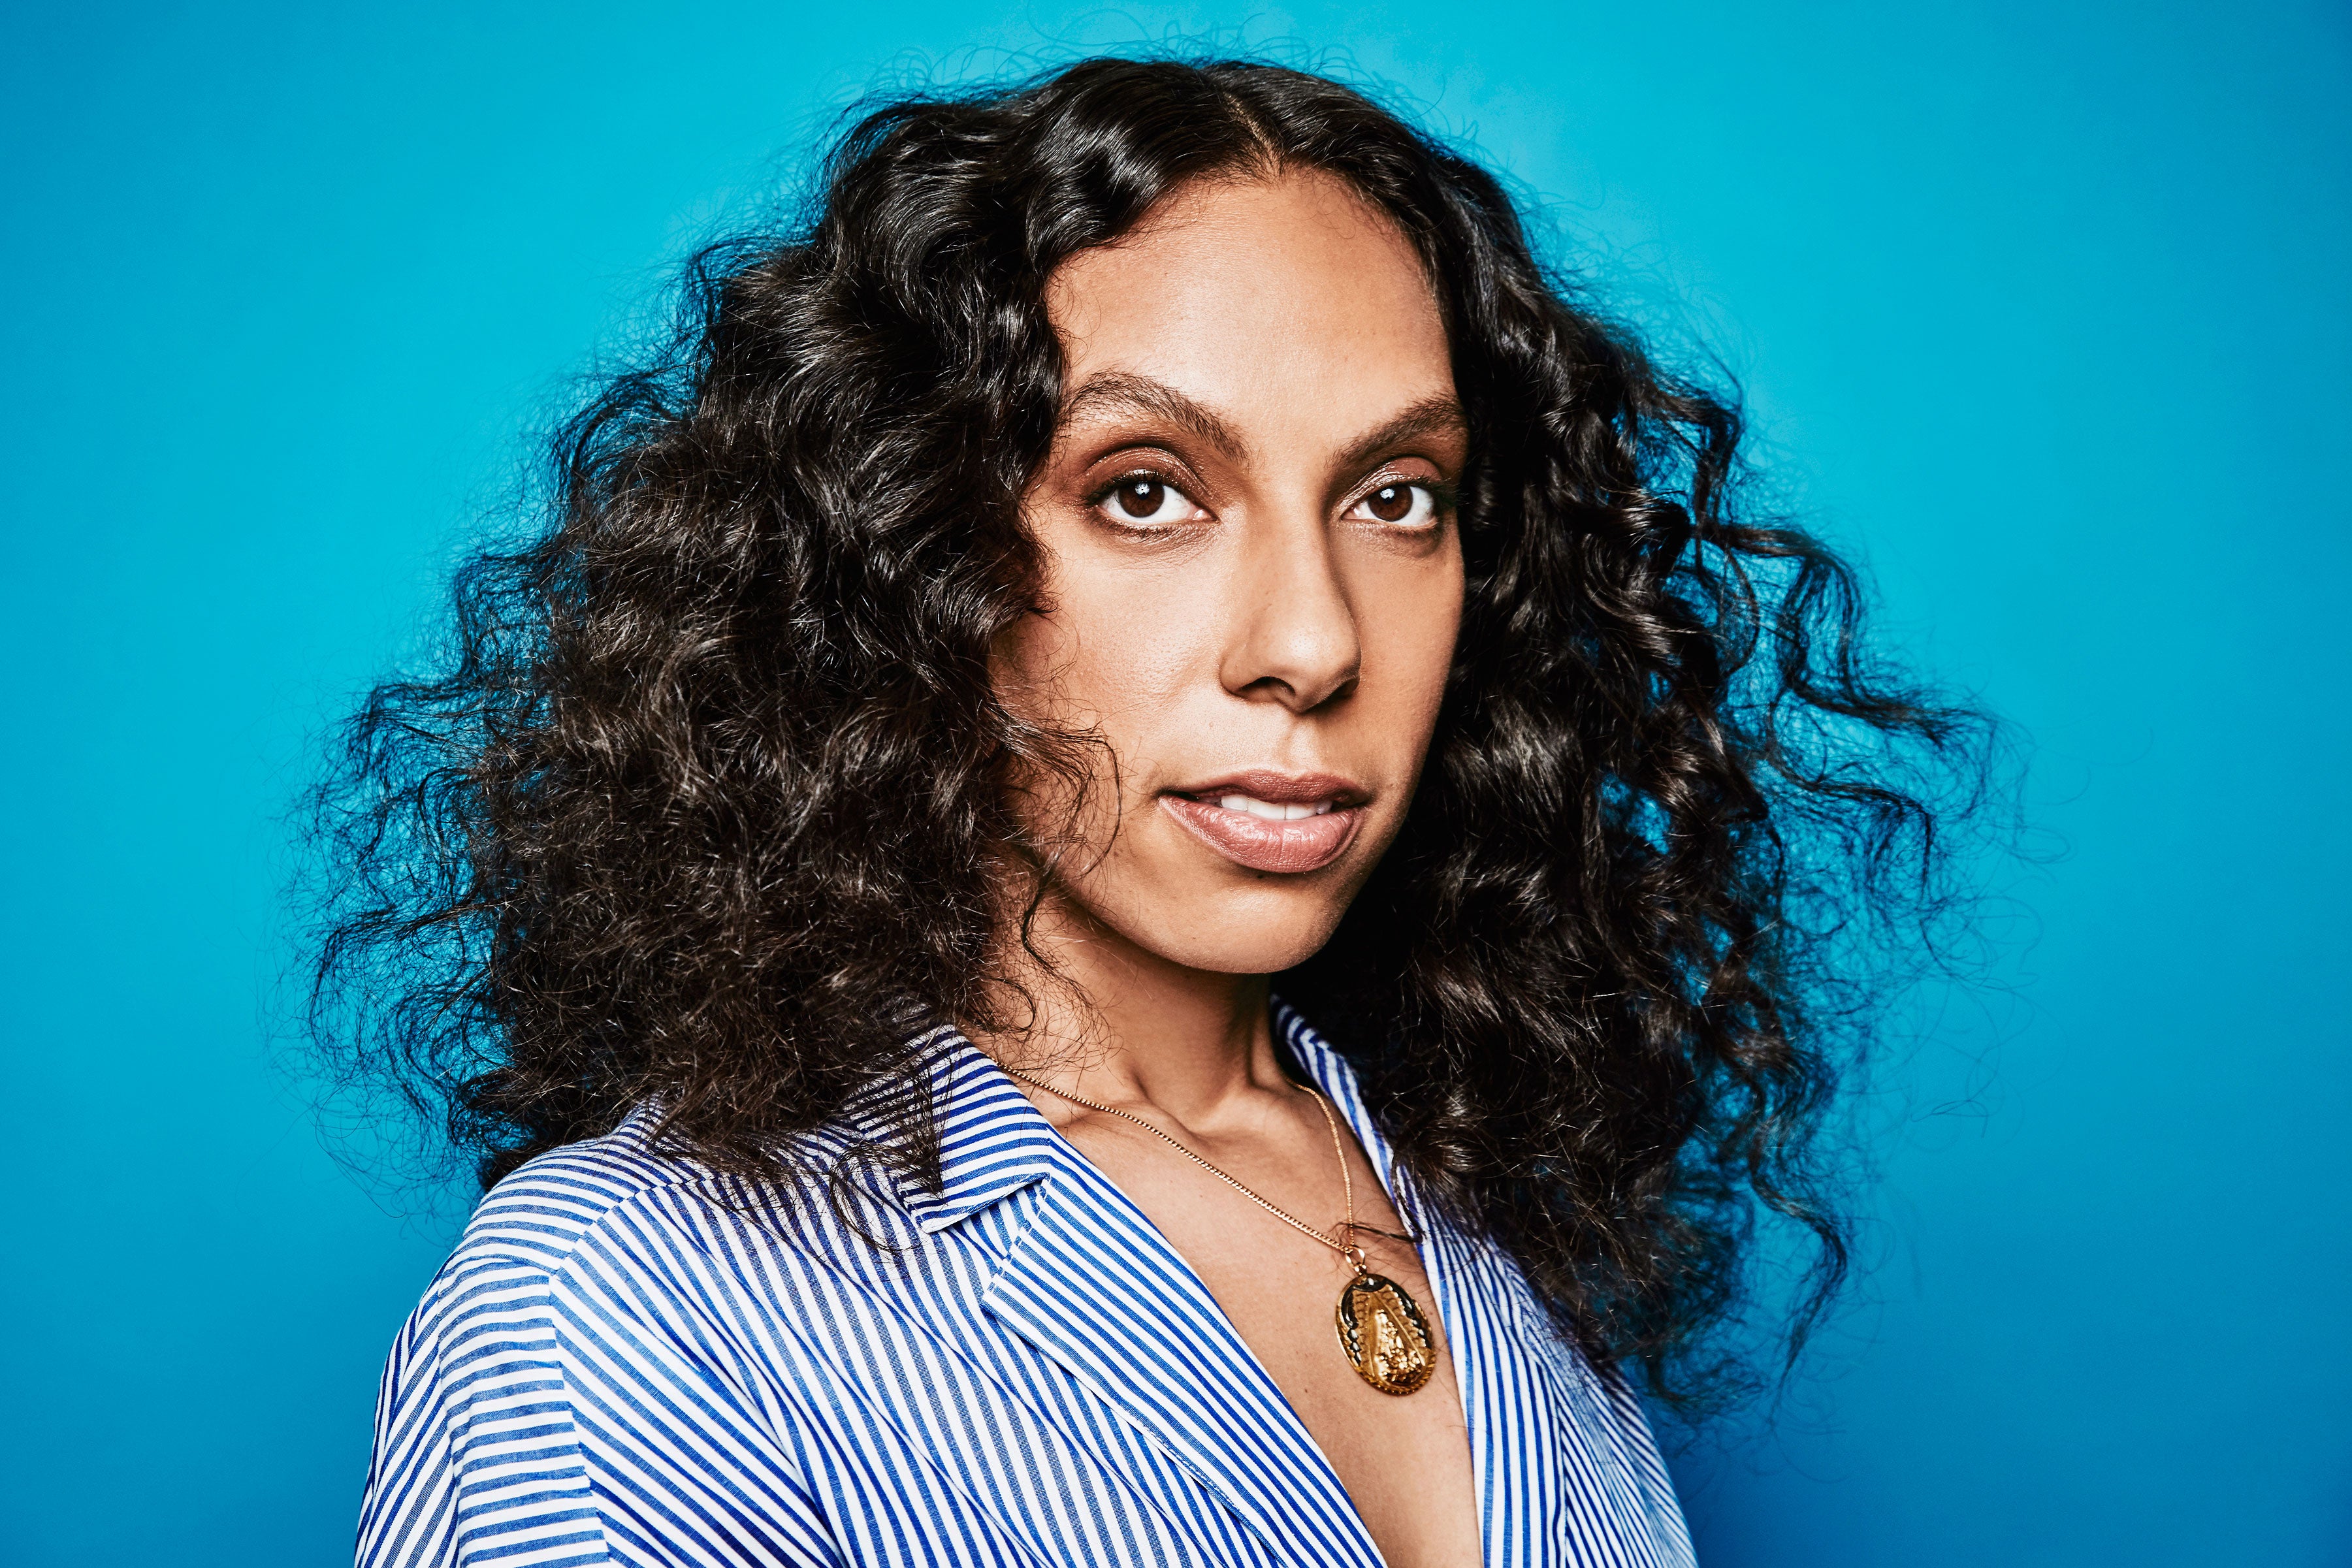 Melina Matsoukas Gives Us A New Perspective On Her Provocative Work And Beyoncé's 'Lemonade' 
